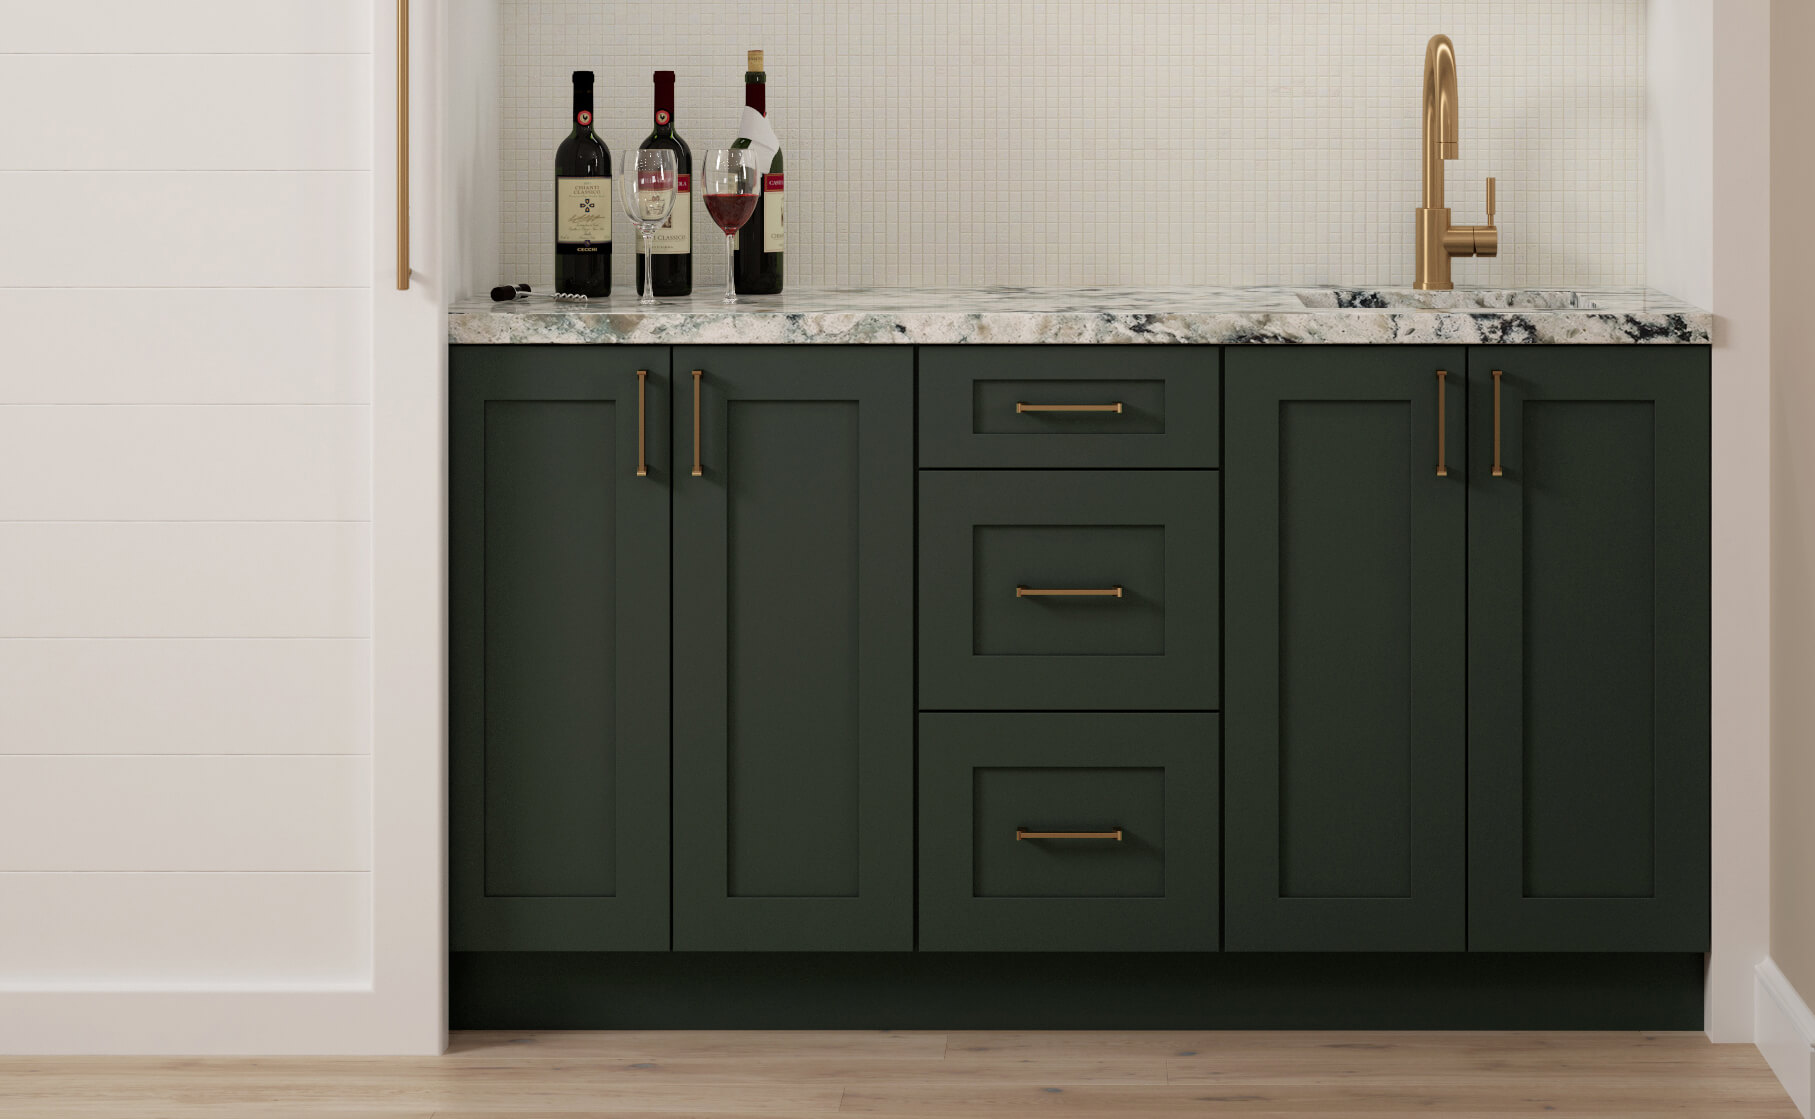 A row of base cabinets that use all 5-piece drawer fronts shown in a dark green painted finish.